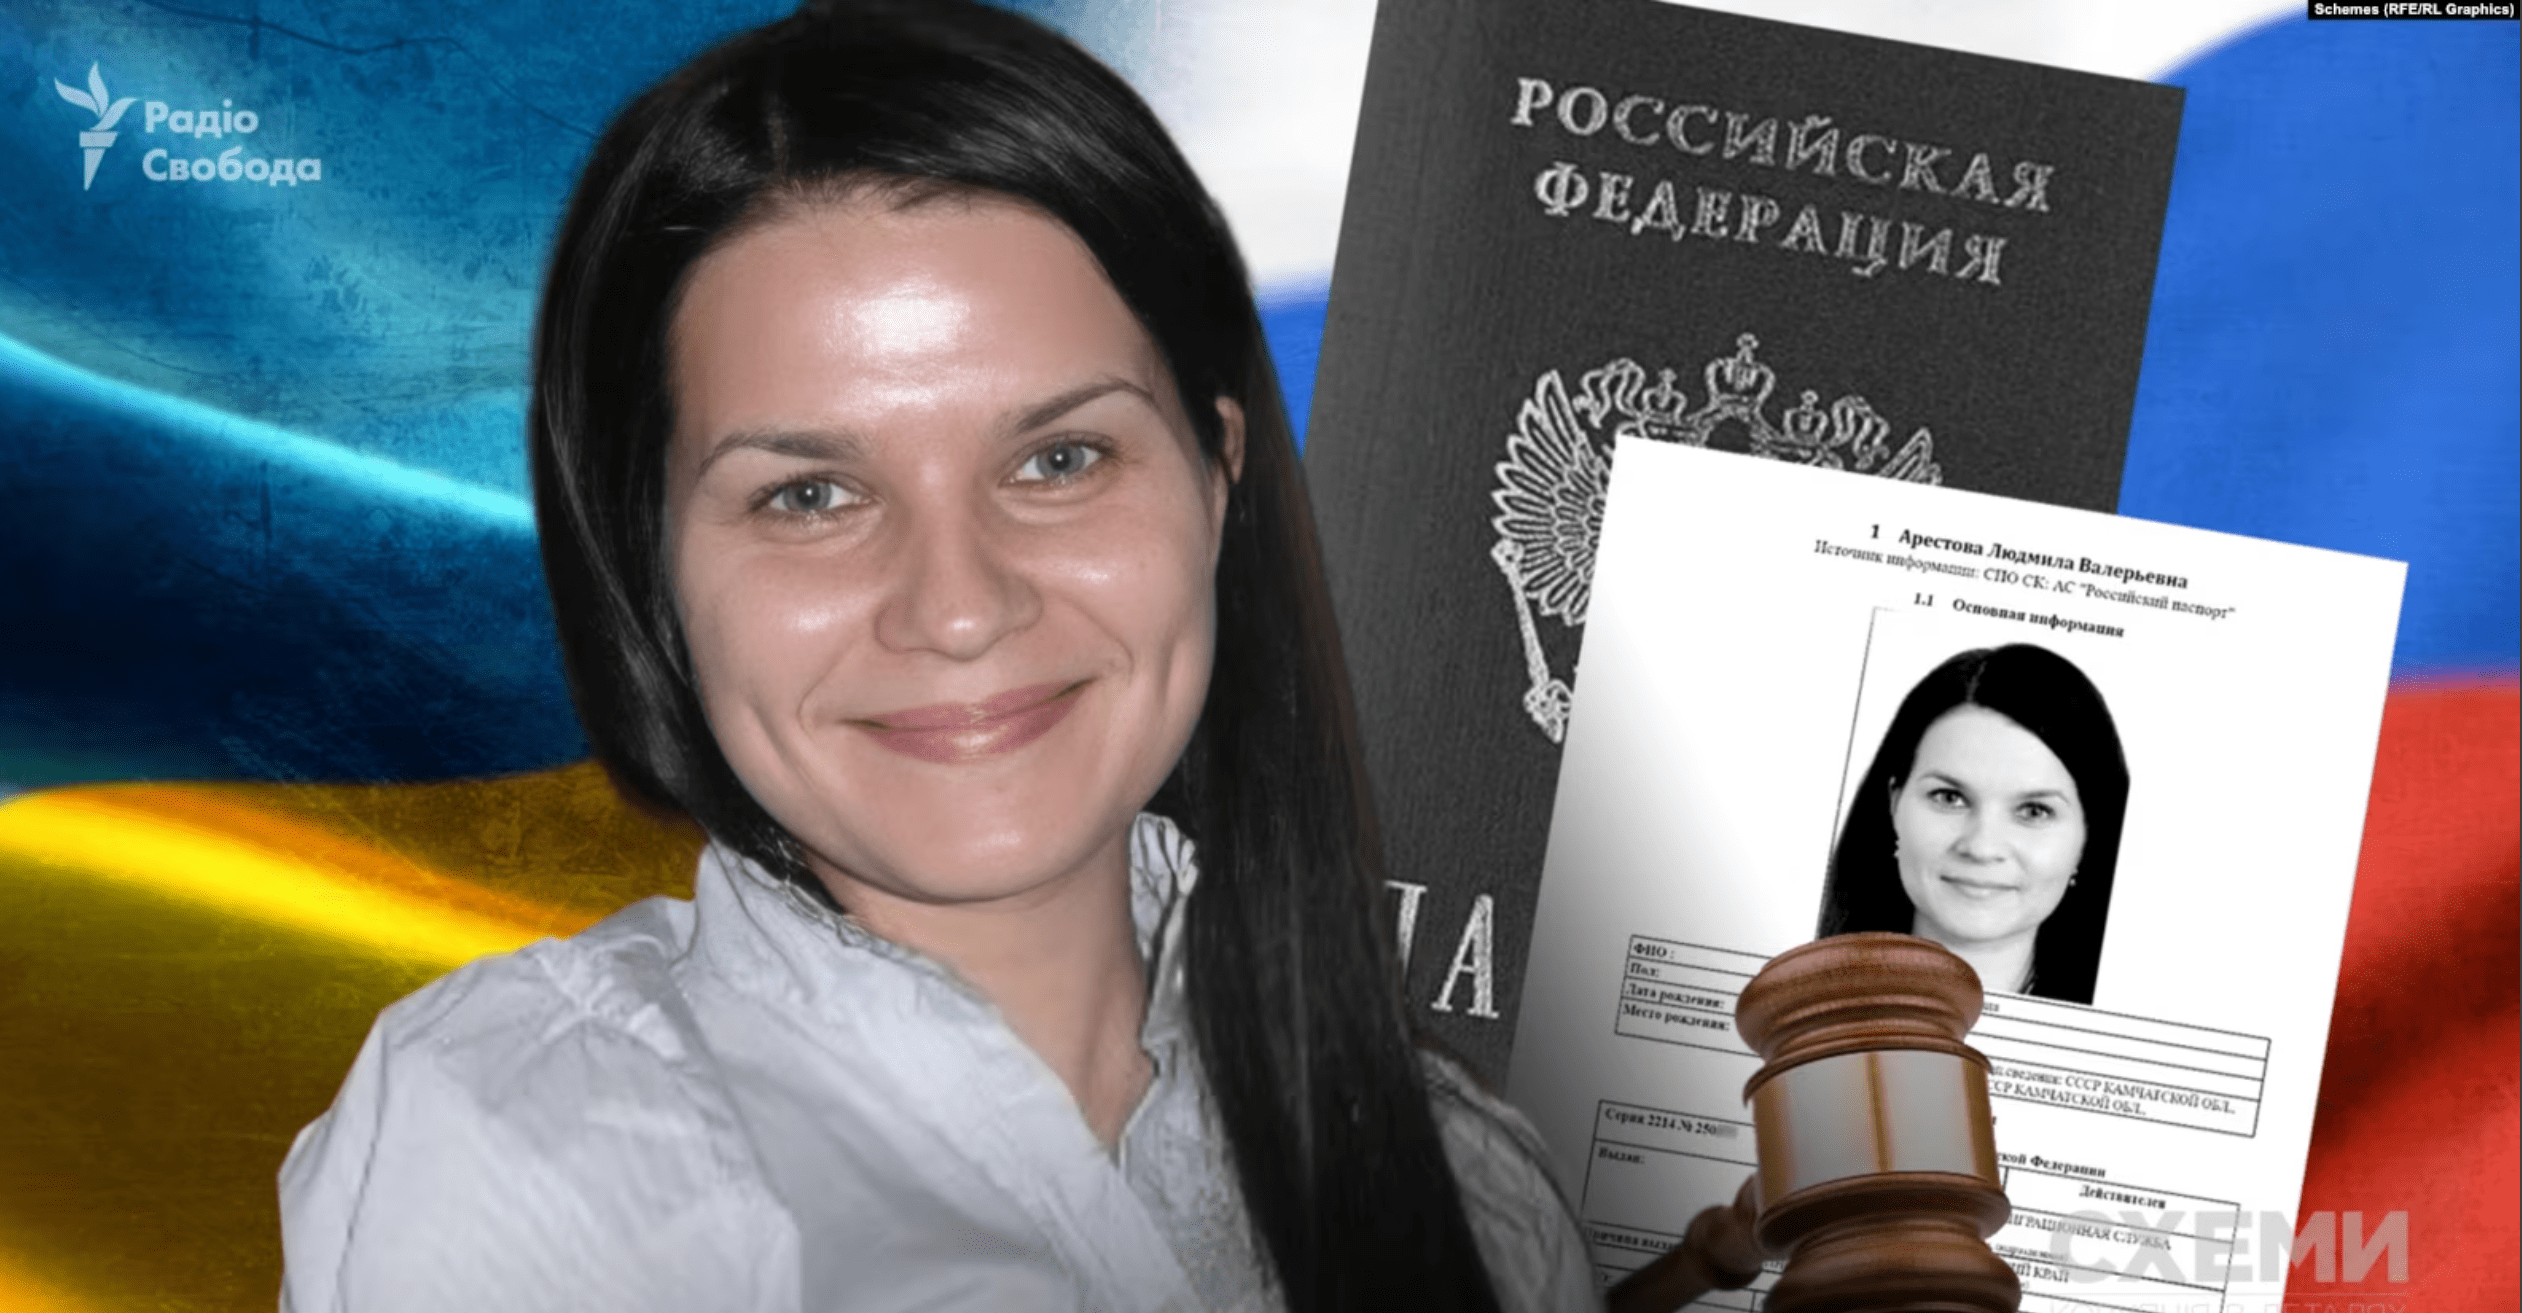 Investigative Stories from Ukraine: Another Ukrainian judge’s Russian connections revealed